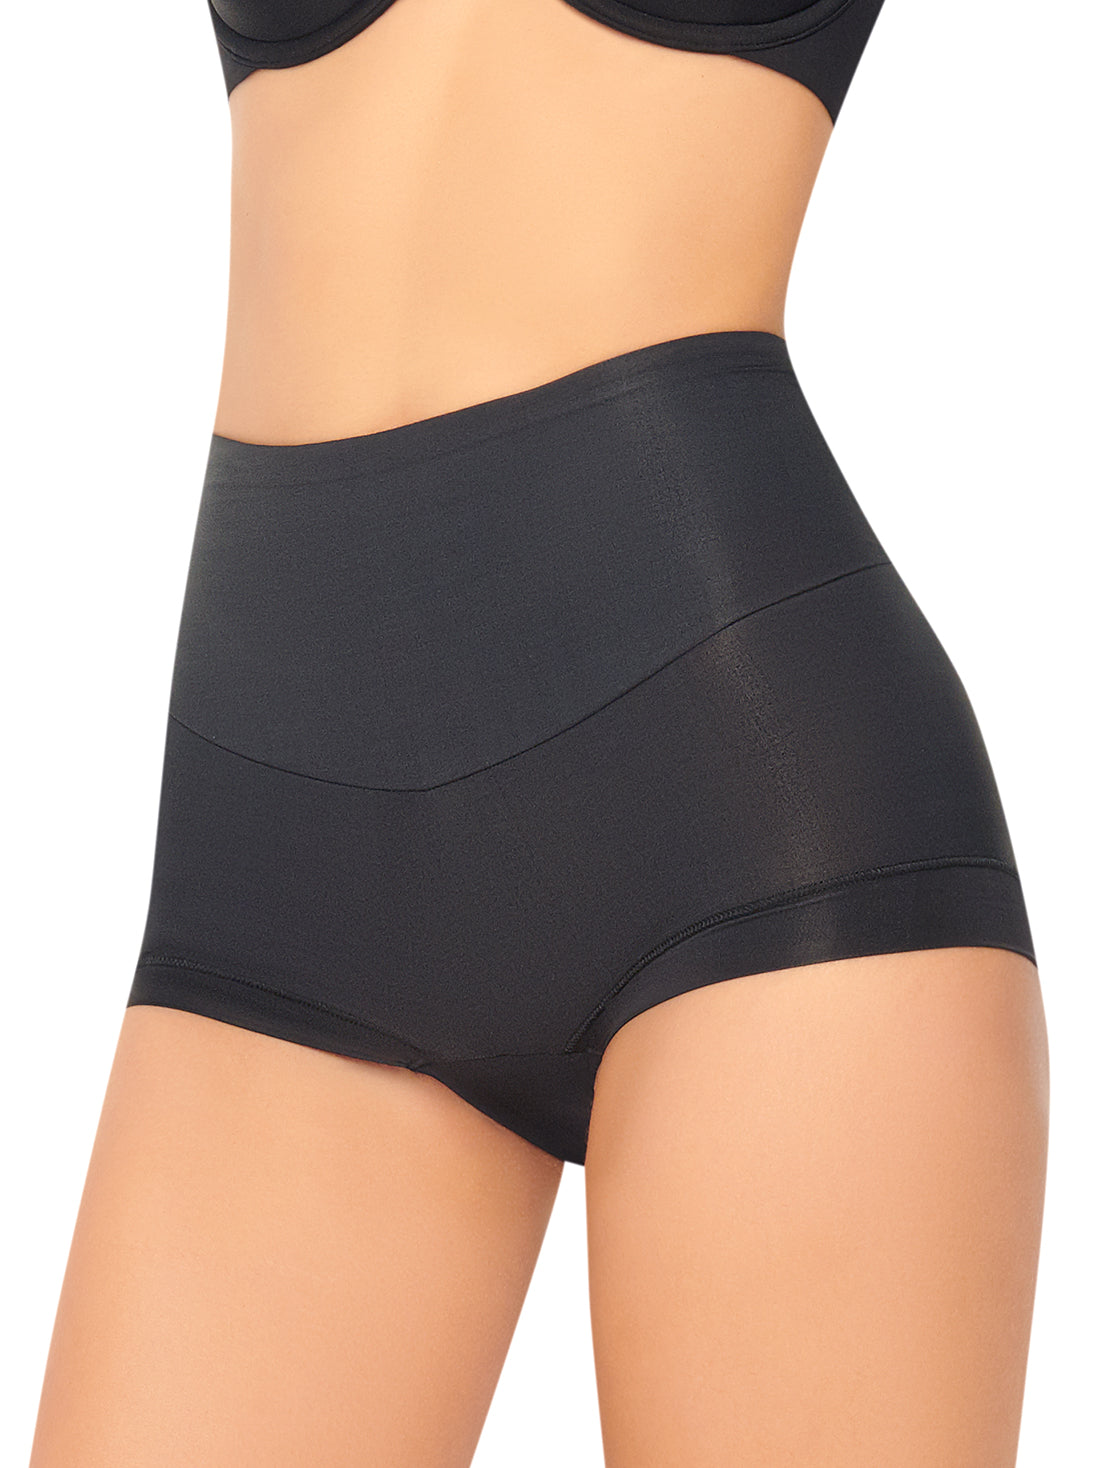 Panties for woman - Shop Ilusion